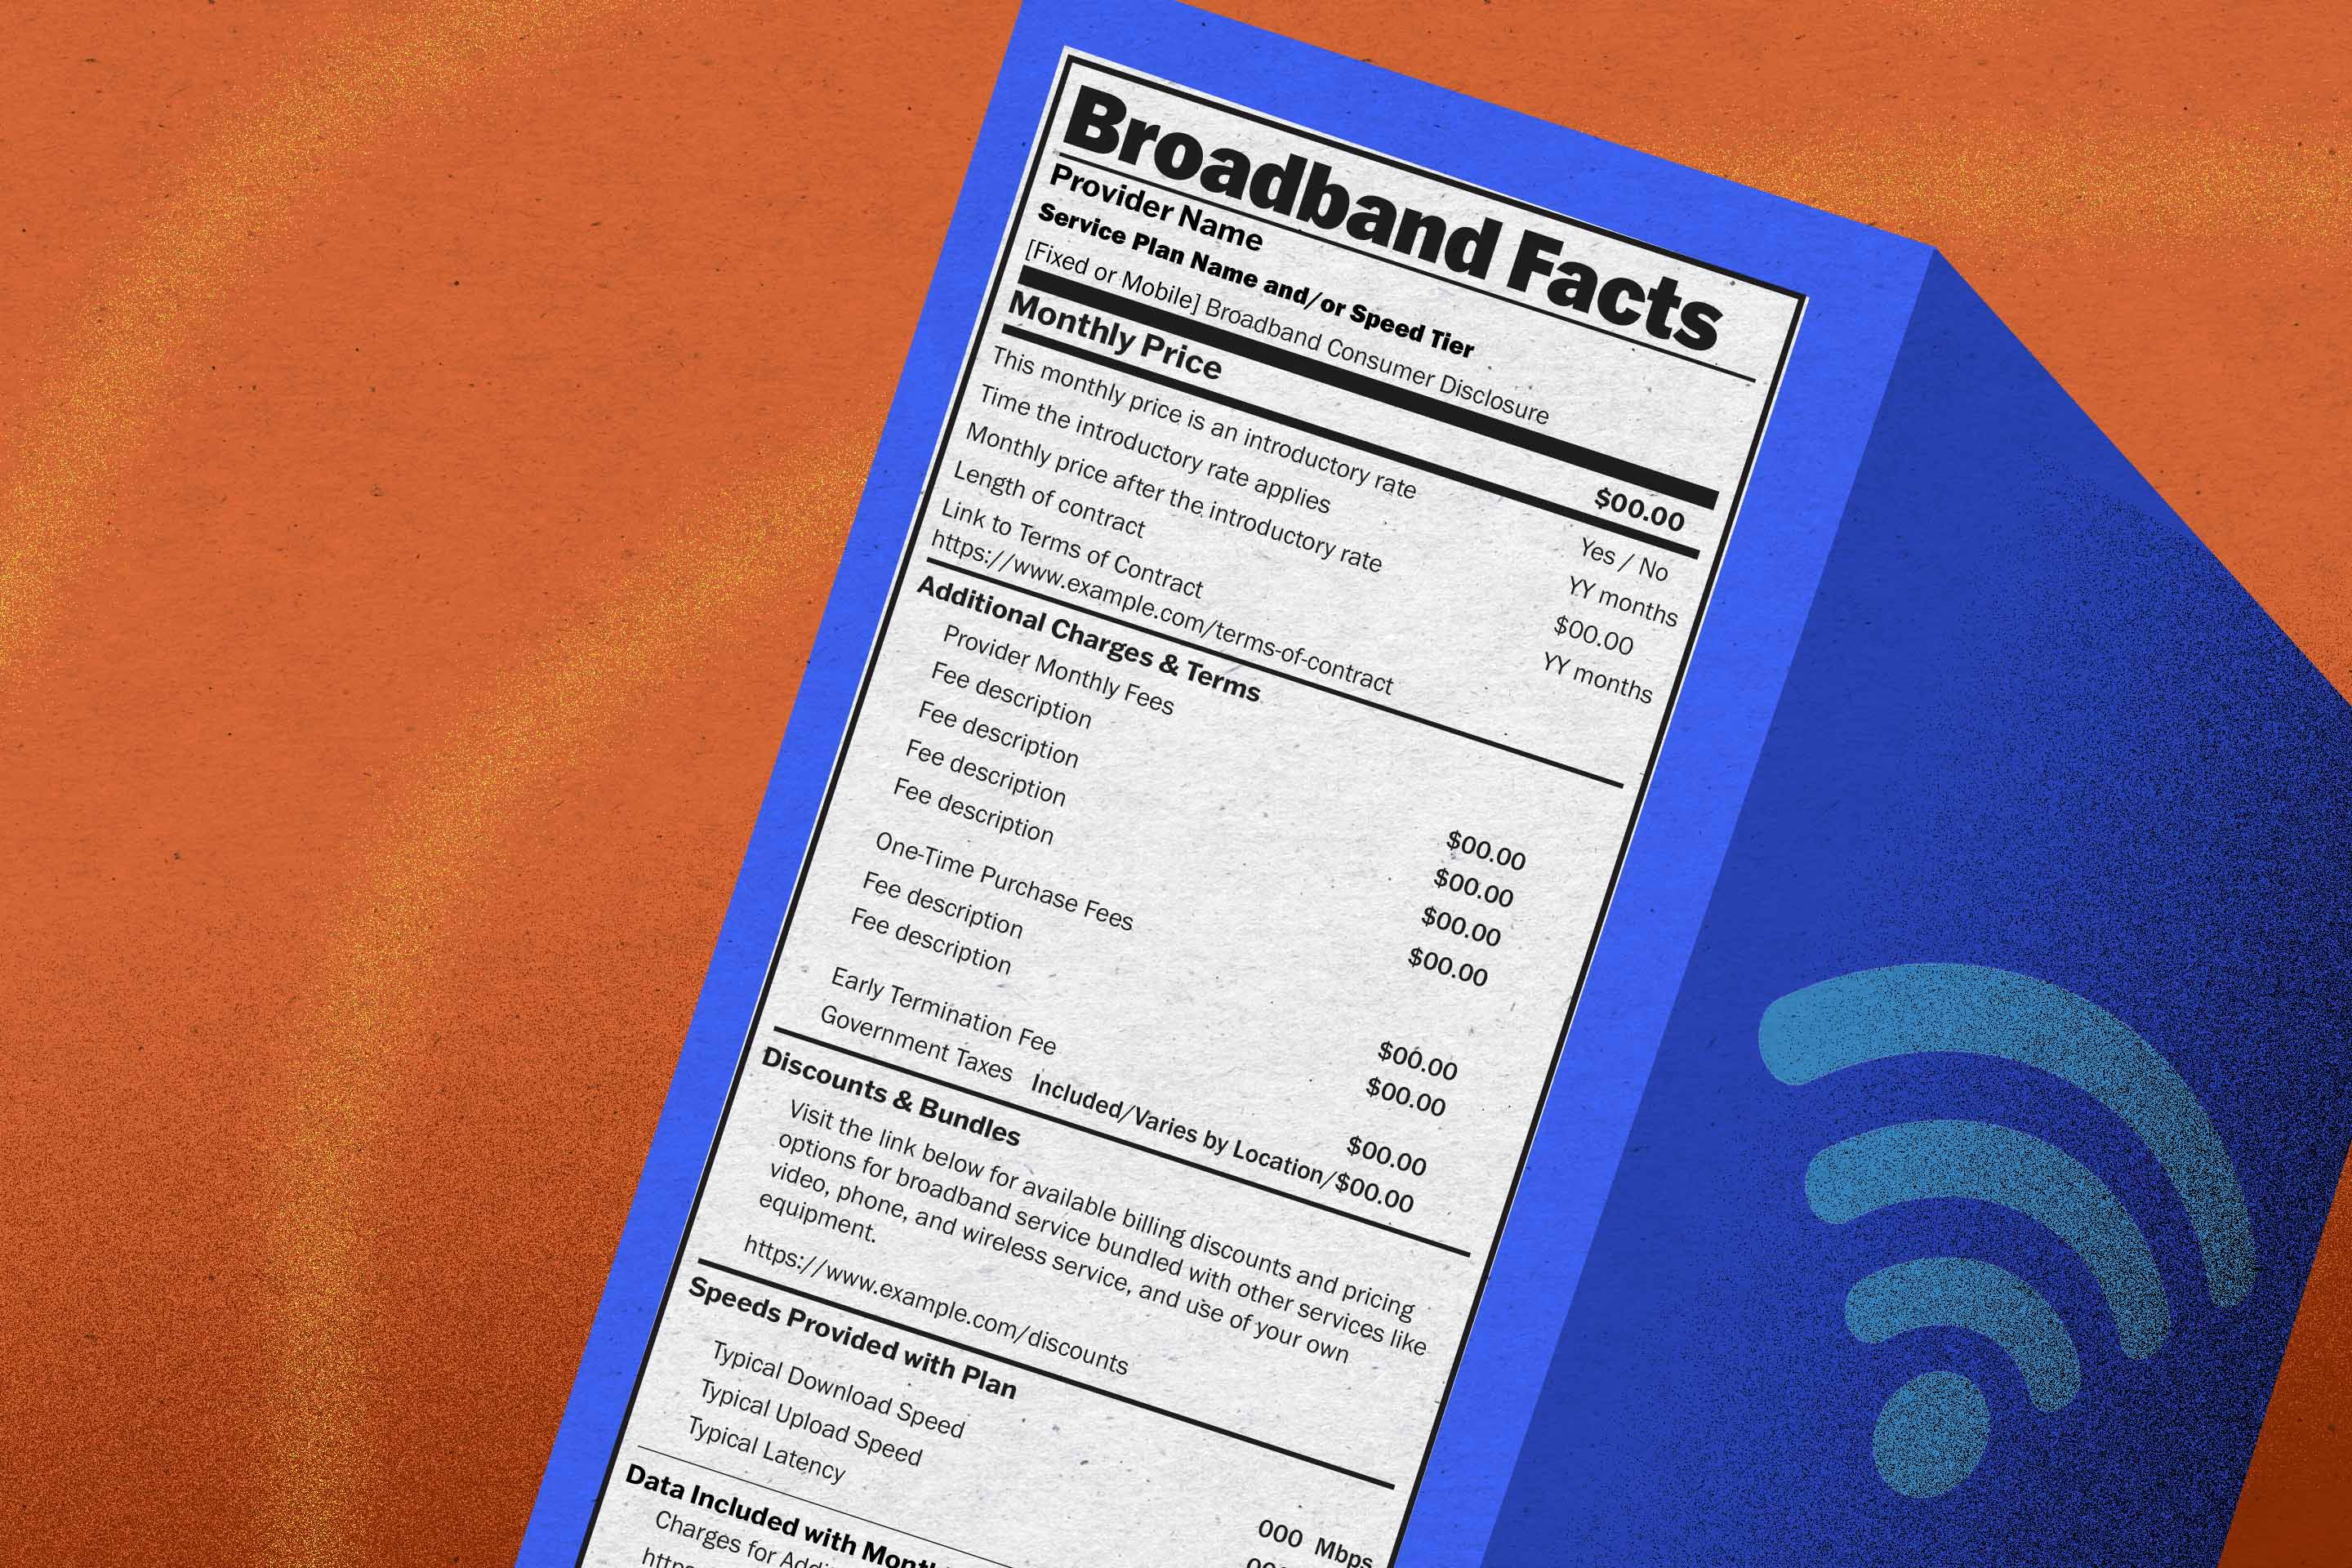 New 'Broadband Labels' Could Make Internet Fees Easier to Understand, Compare